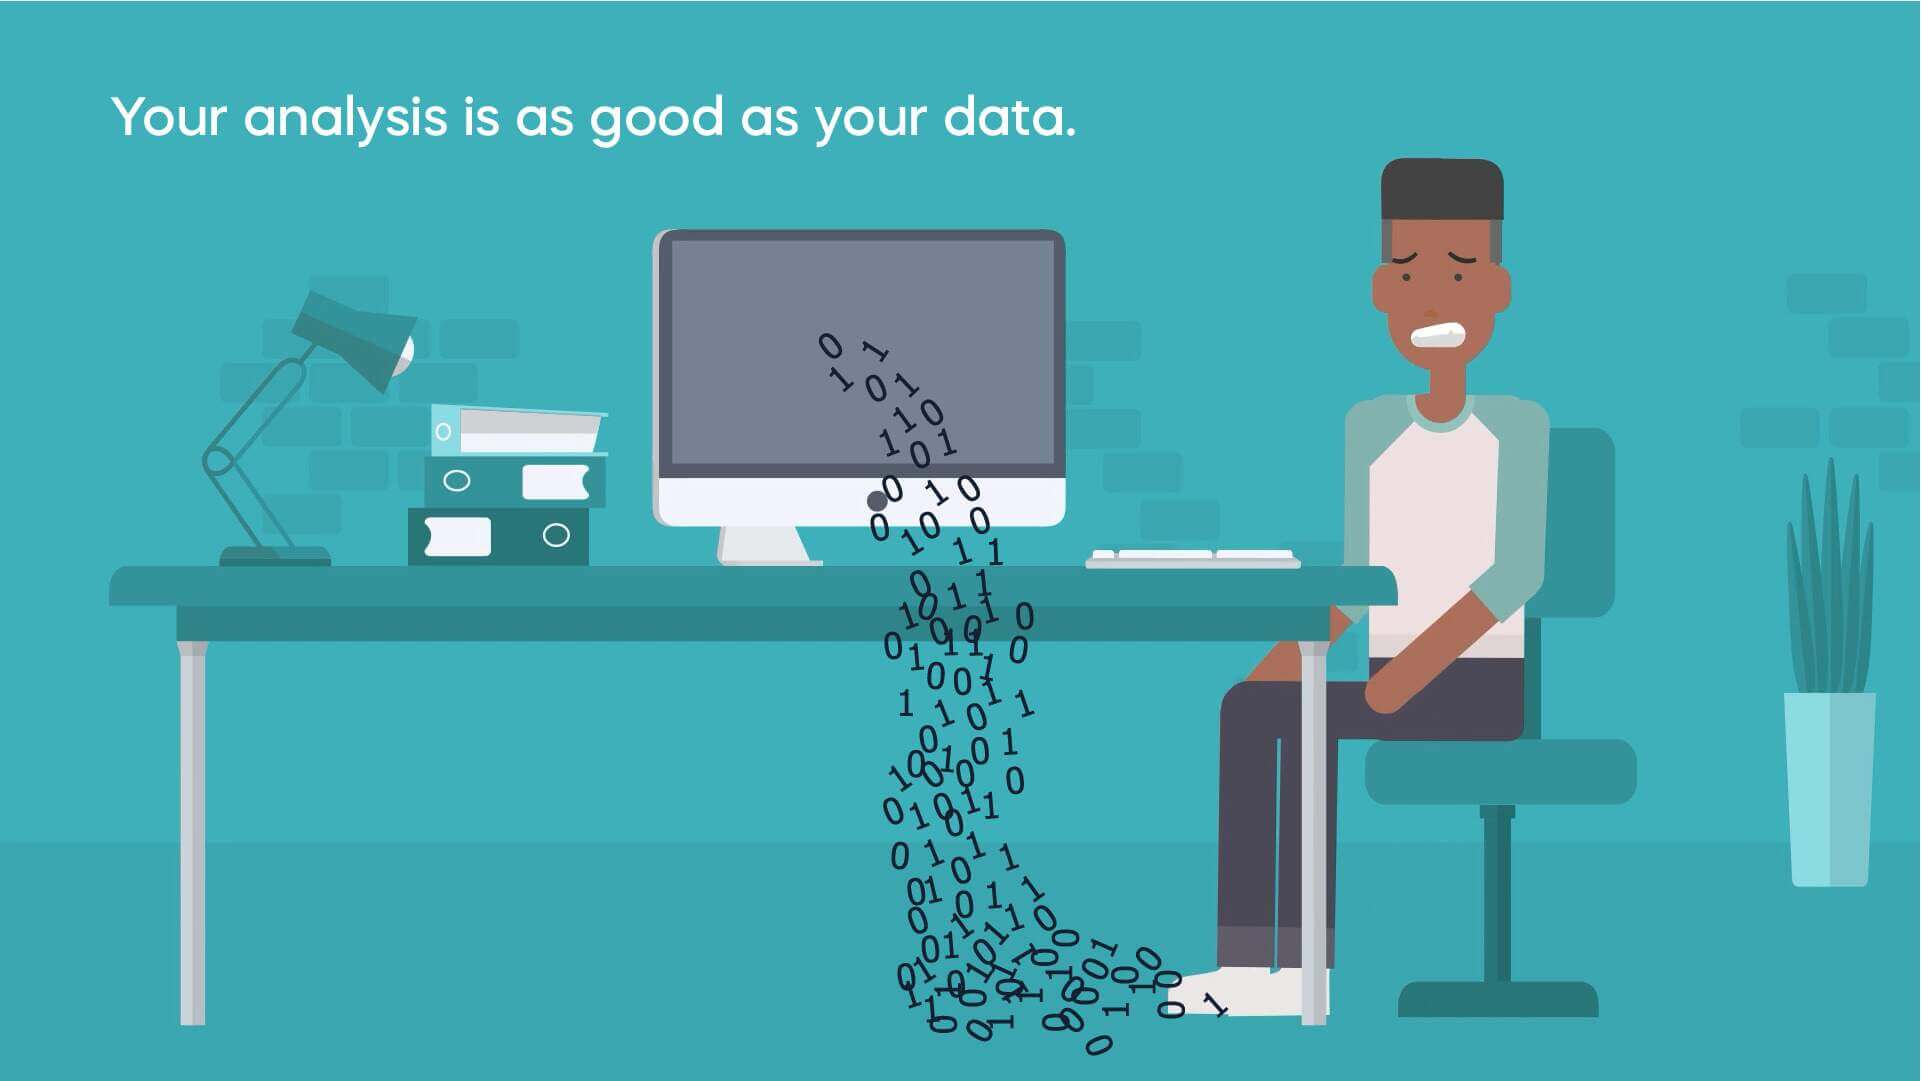 Your analysis is as good as your data.